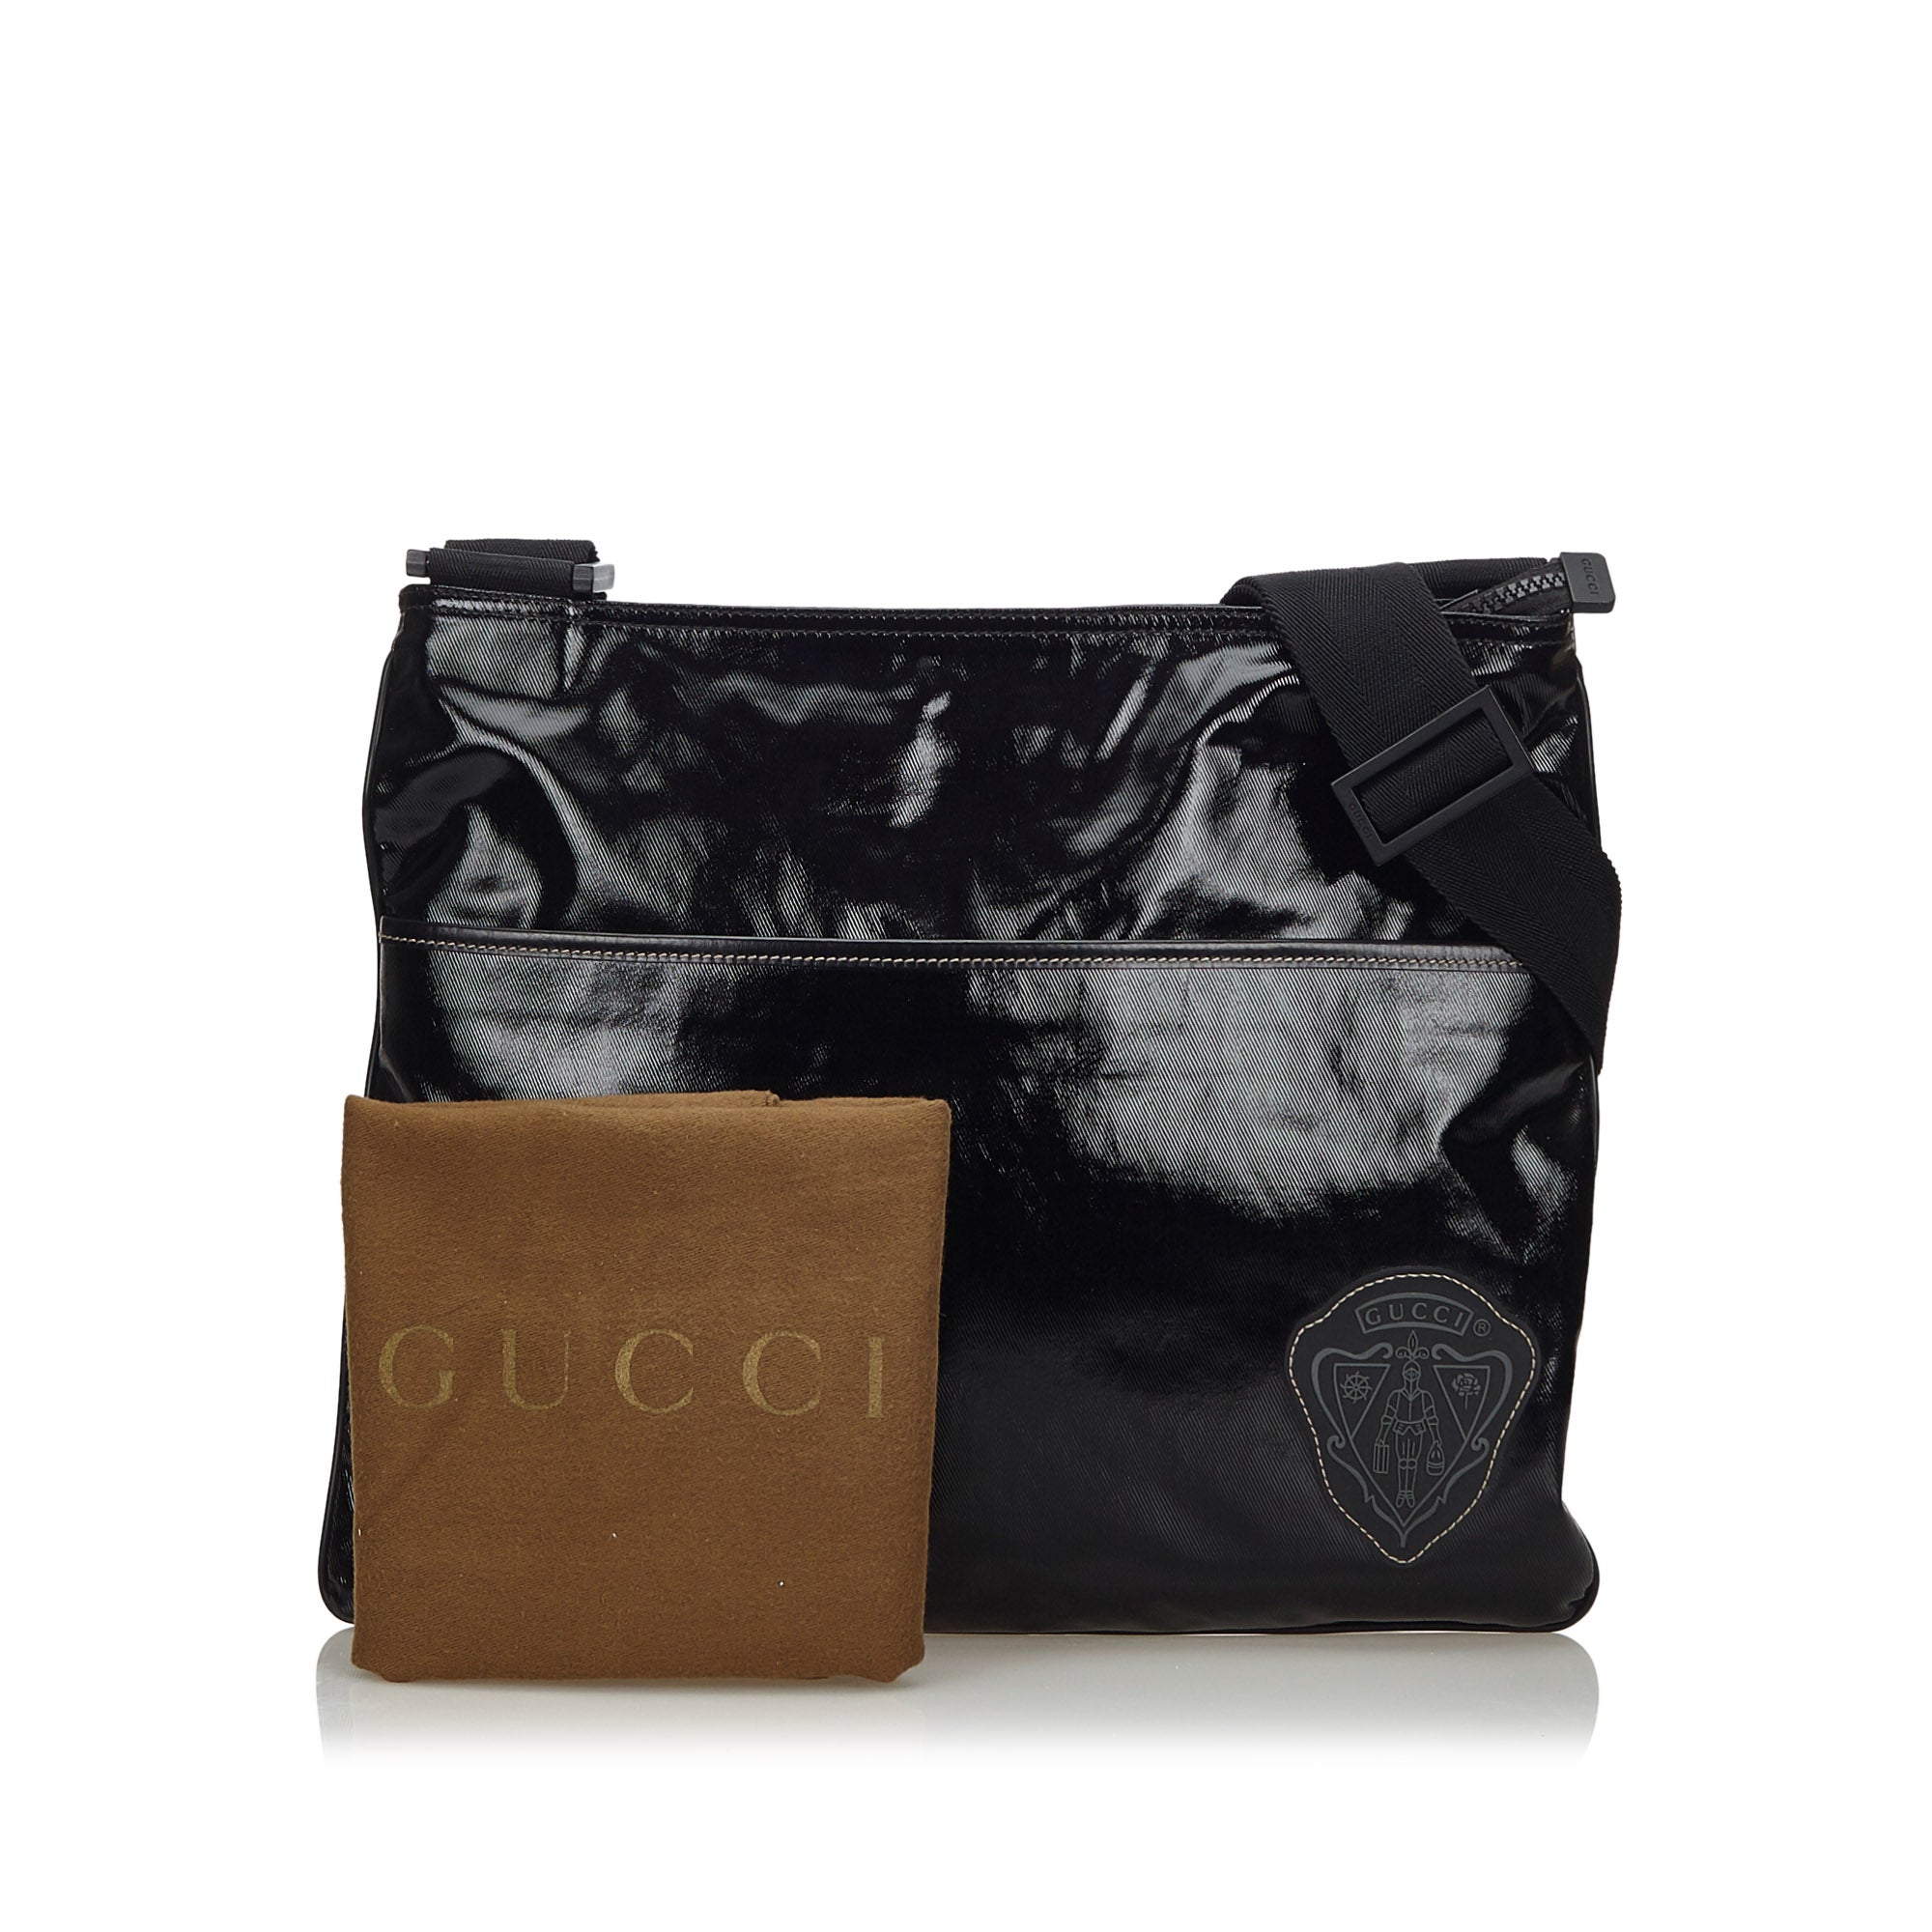 Buy & Consign Authentic Gucci Coated Canvas Crossbody Bag at The Plush Posh